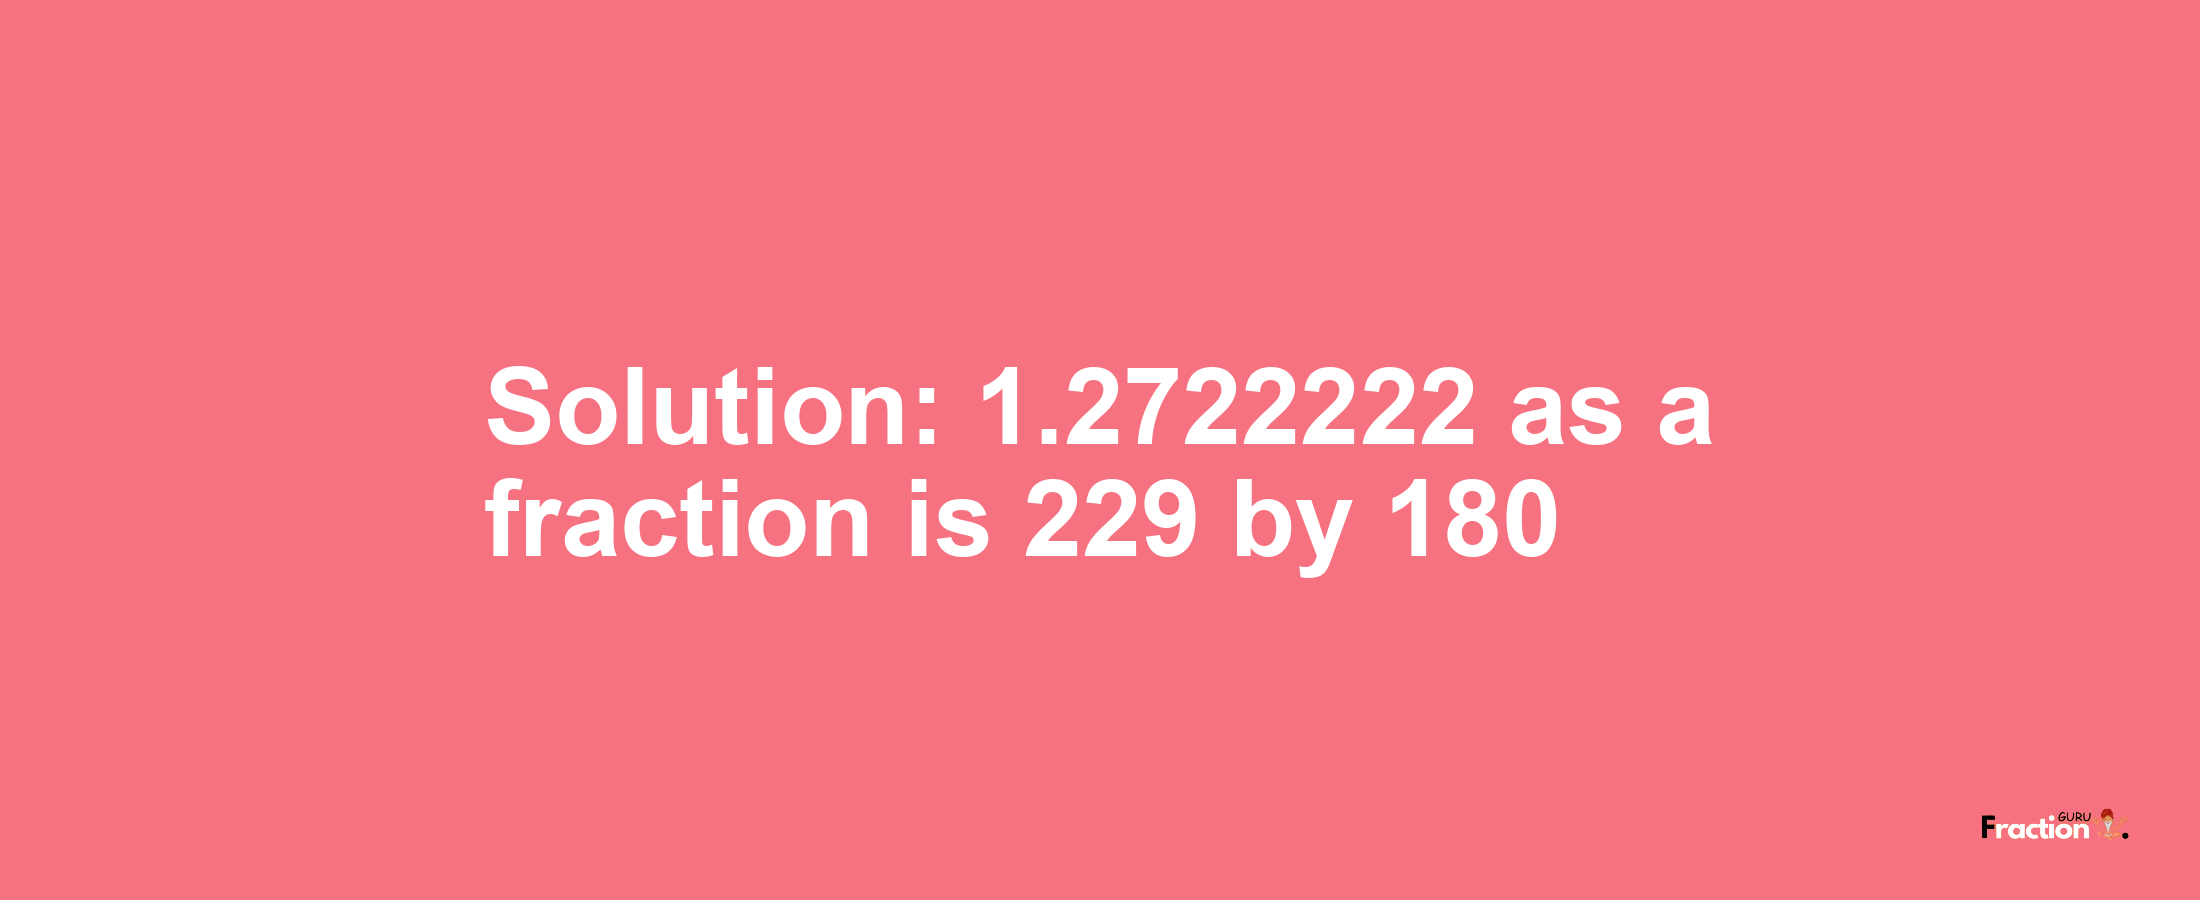 Solution:1.2722222 as a fraction is 229/180